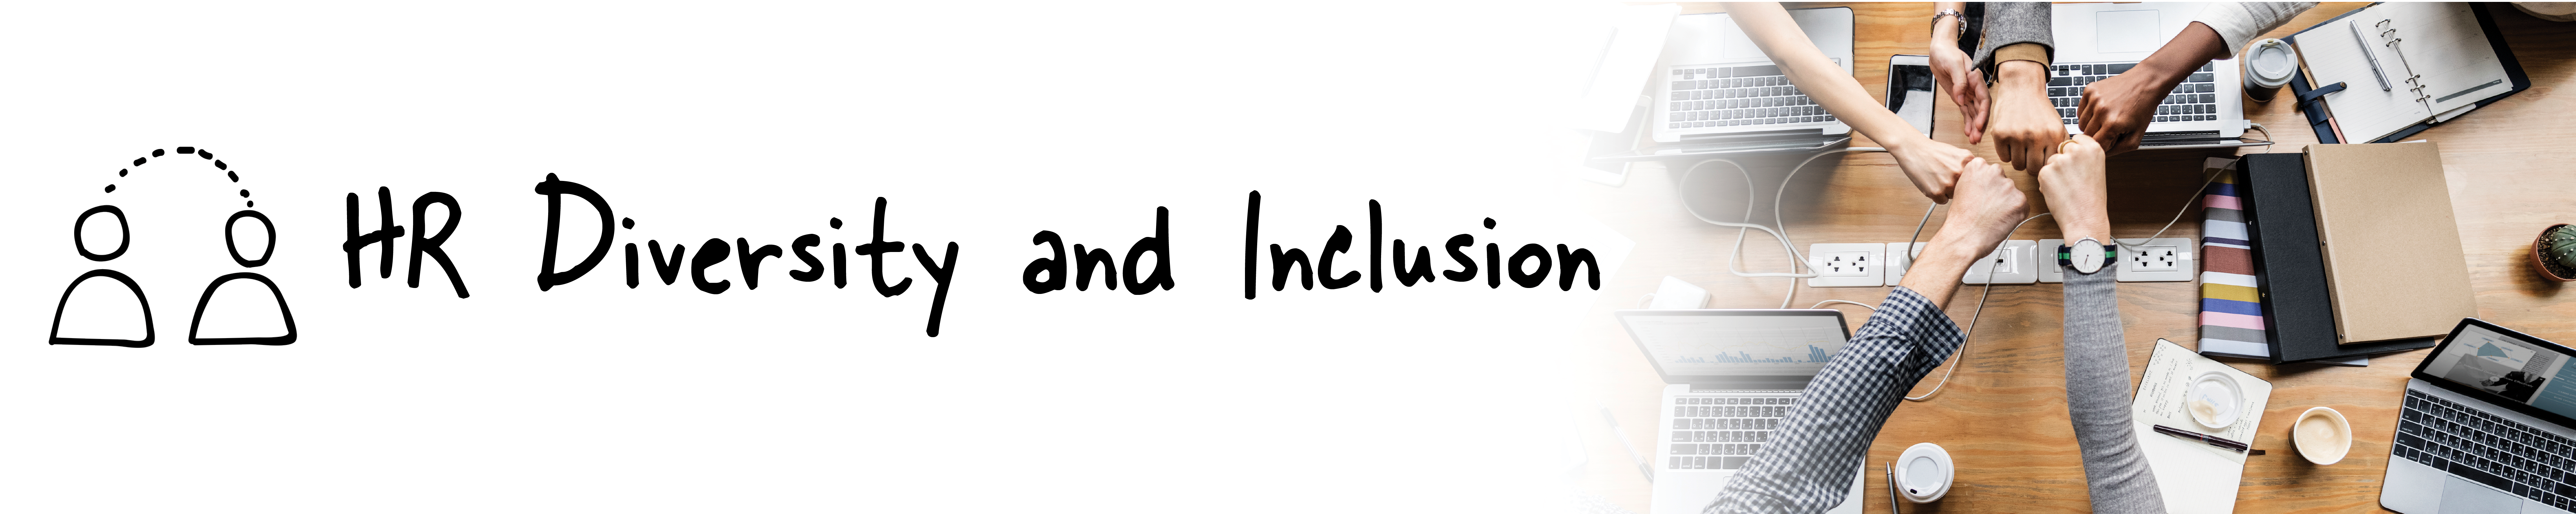 HR Diversity and Inclusion